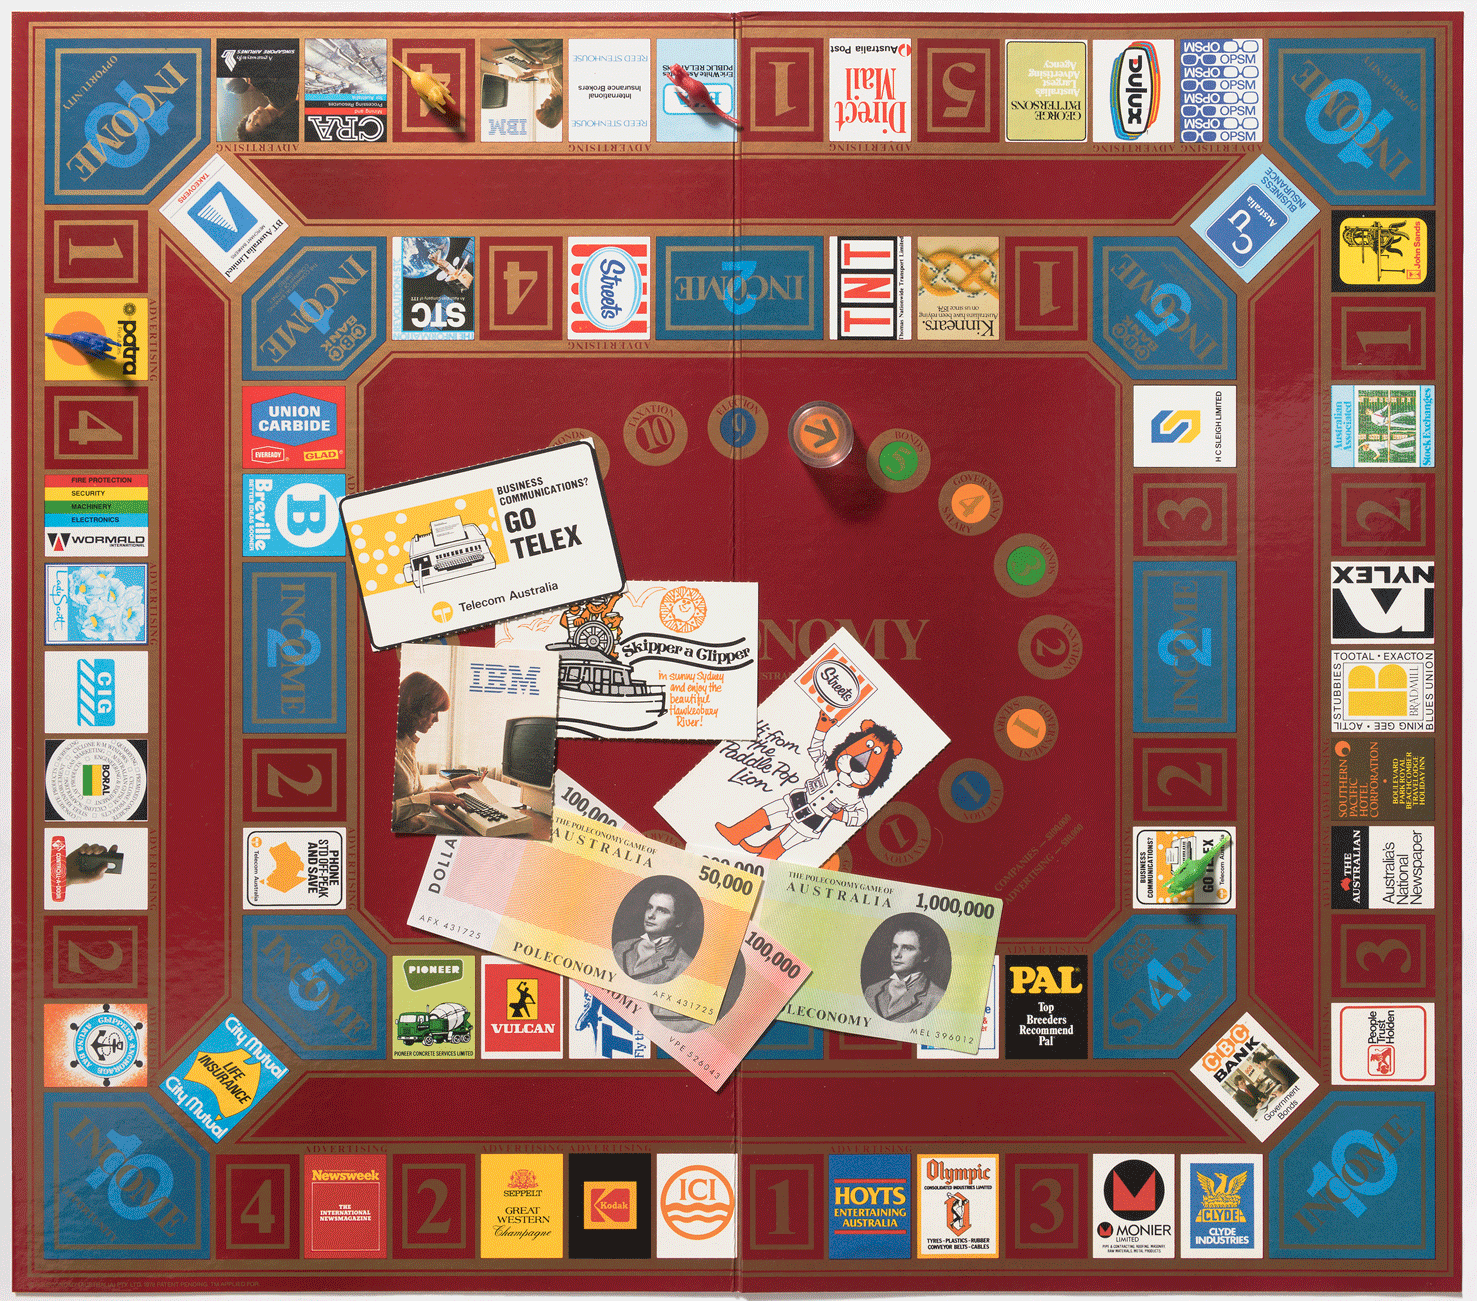 A board game with a dark red board opened up with a row squares around the outside of the board with the names of different companies such as Kodak, Hoyts and Newsweek. In the centre are some game pieces including 3 pieces of paper representing money and some cards with businesses on them including IBM and Telecom. 